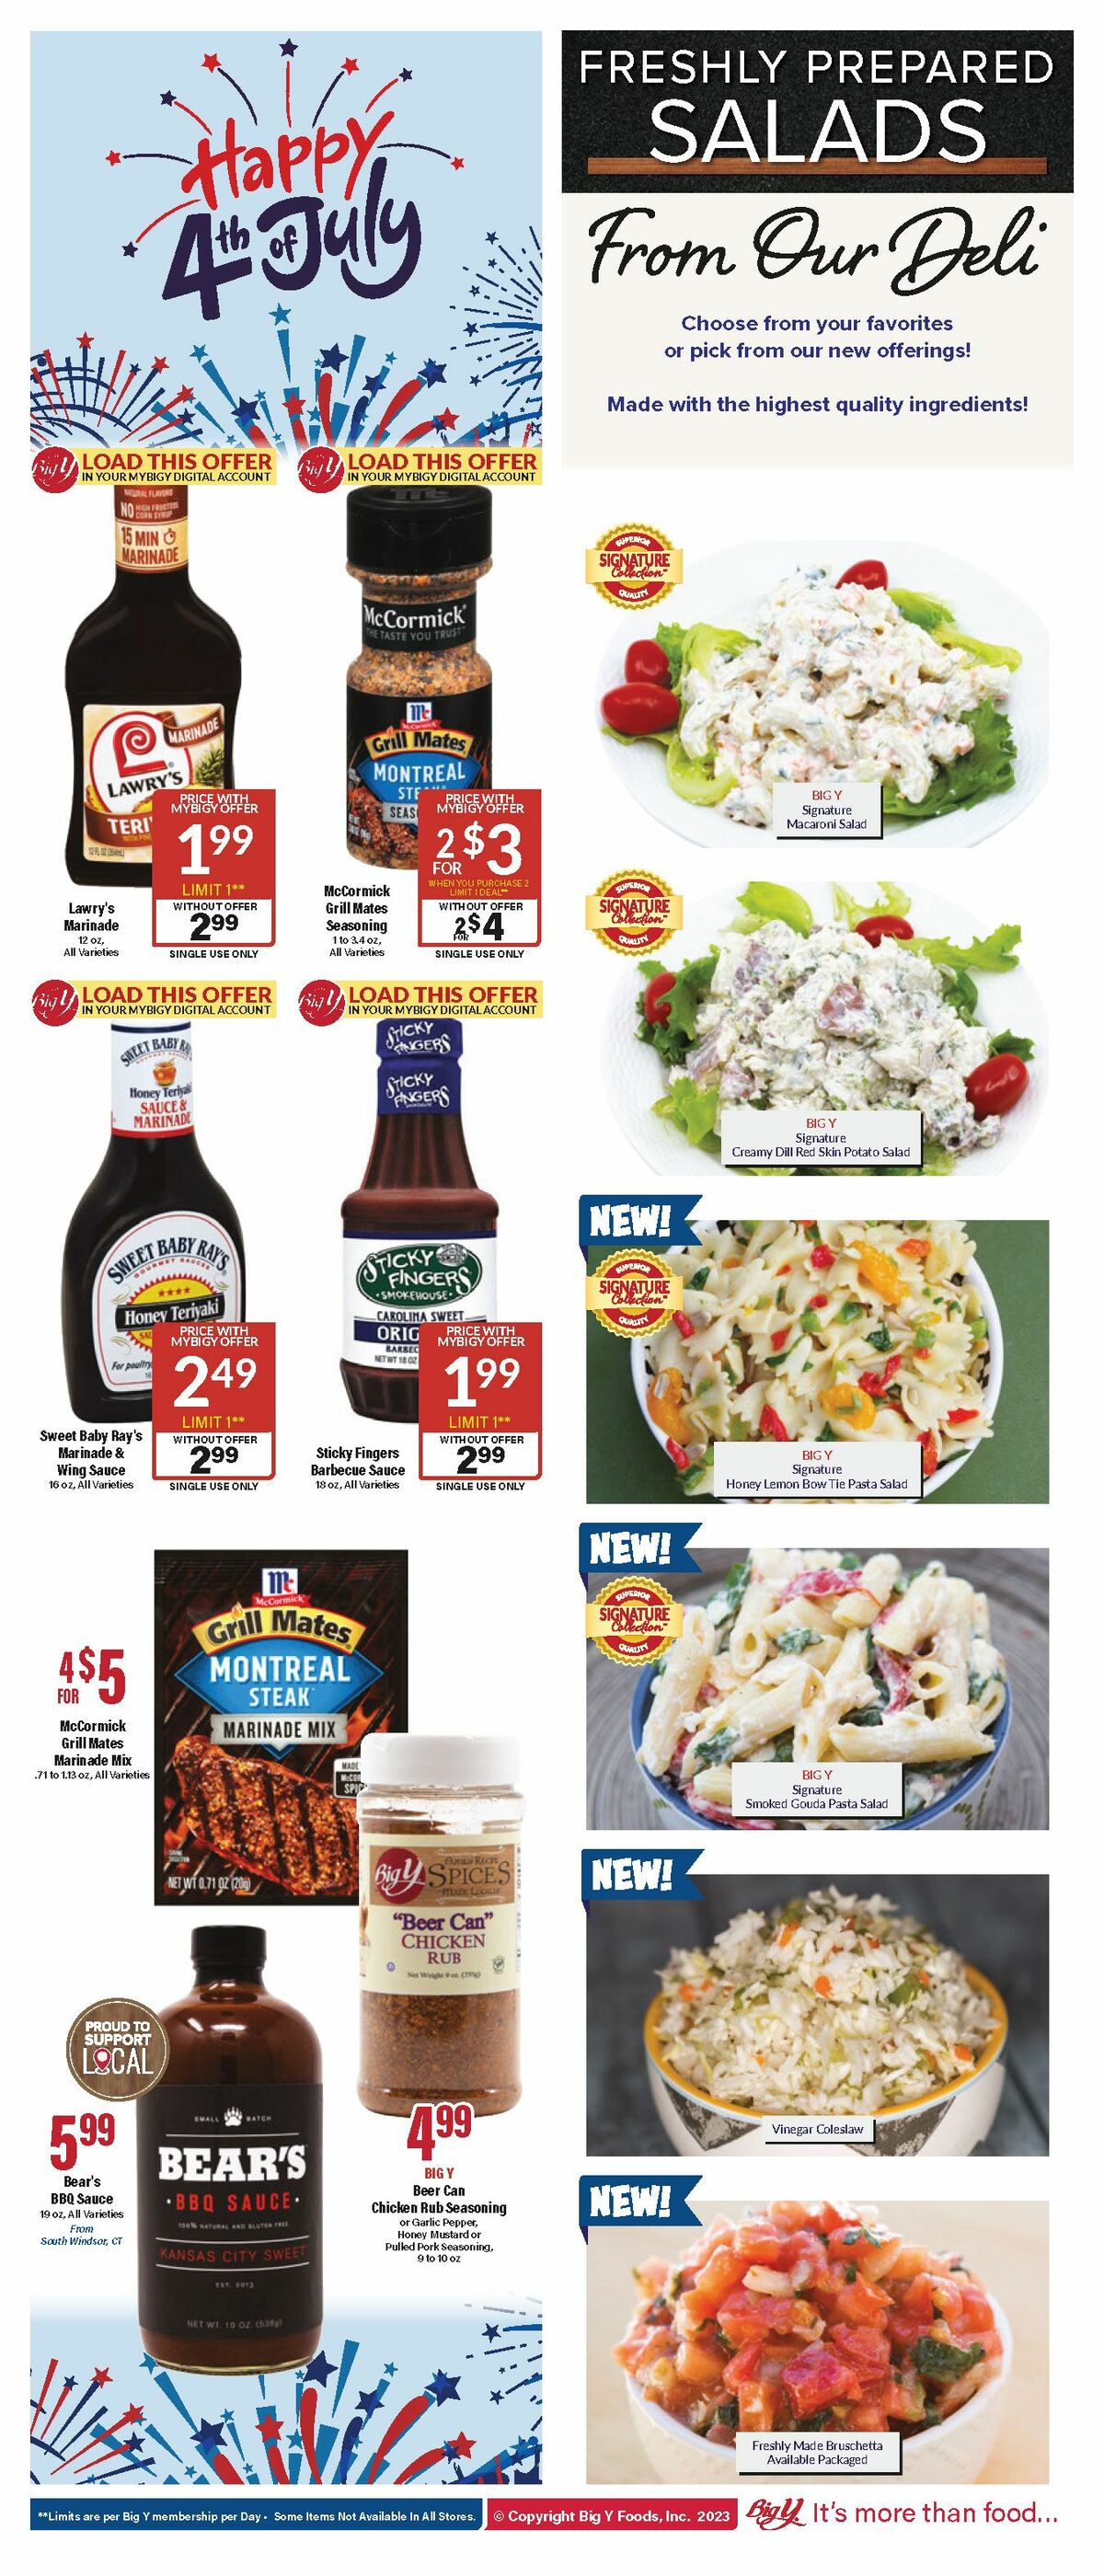 Big Y Weekly Ad from June 29